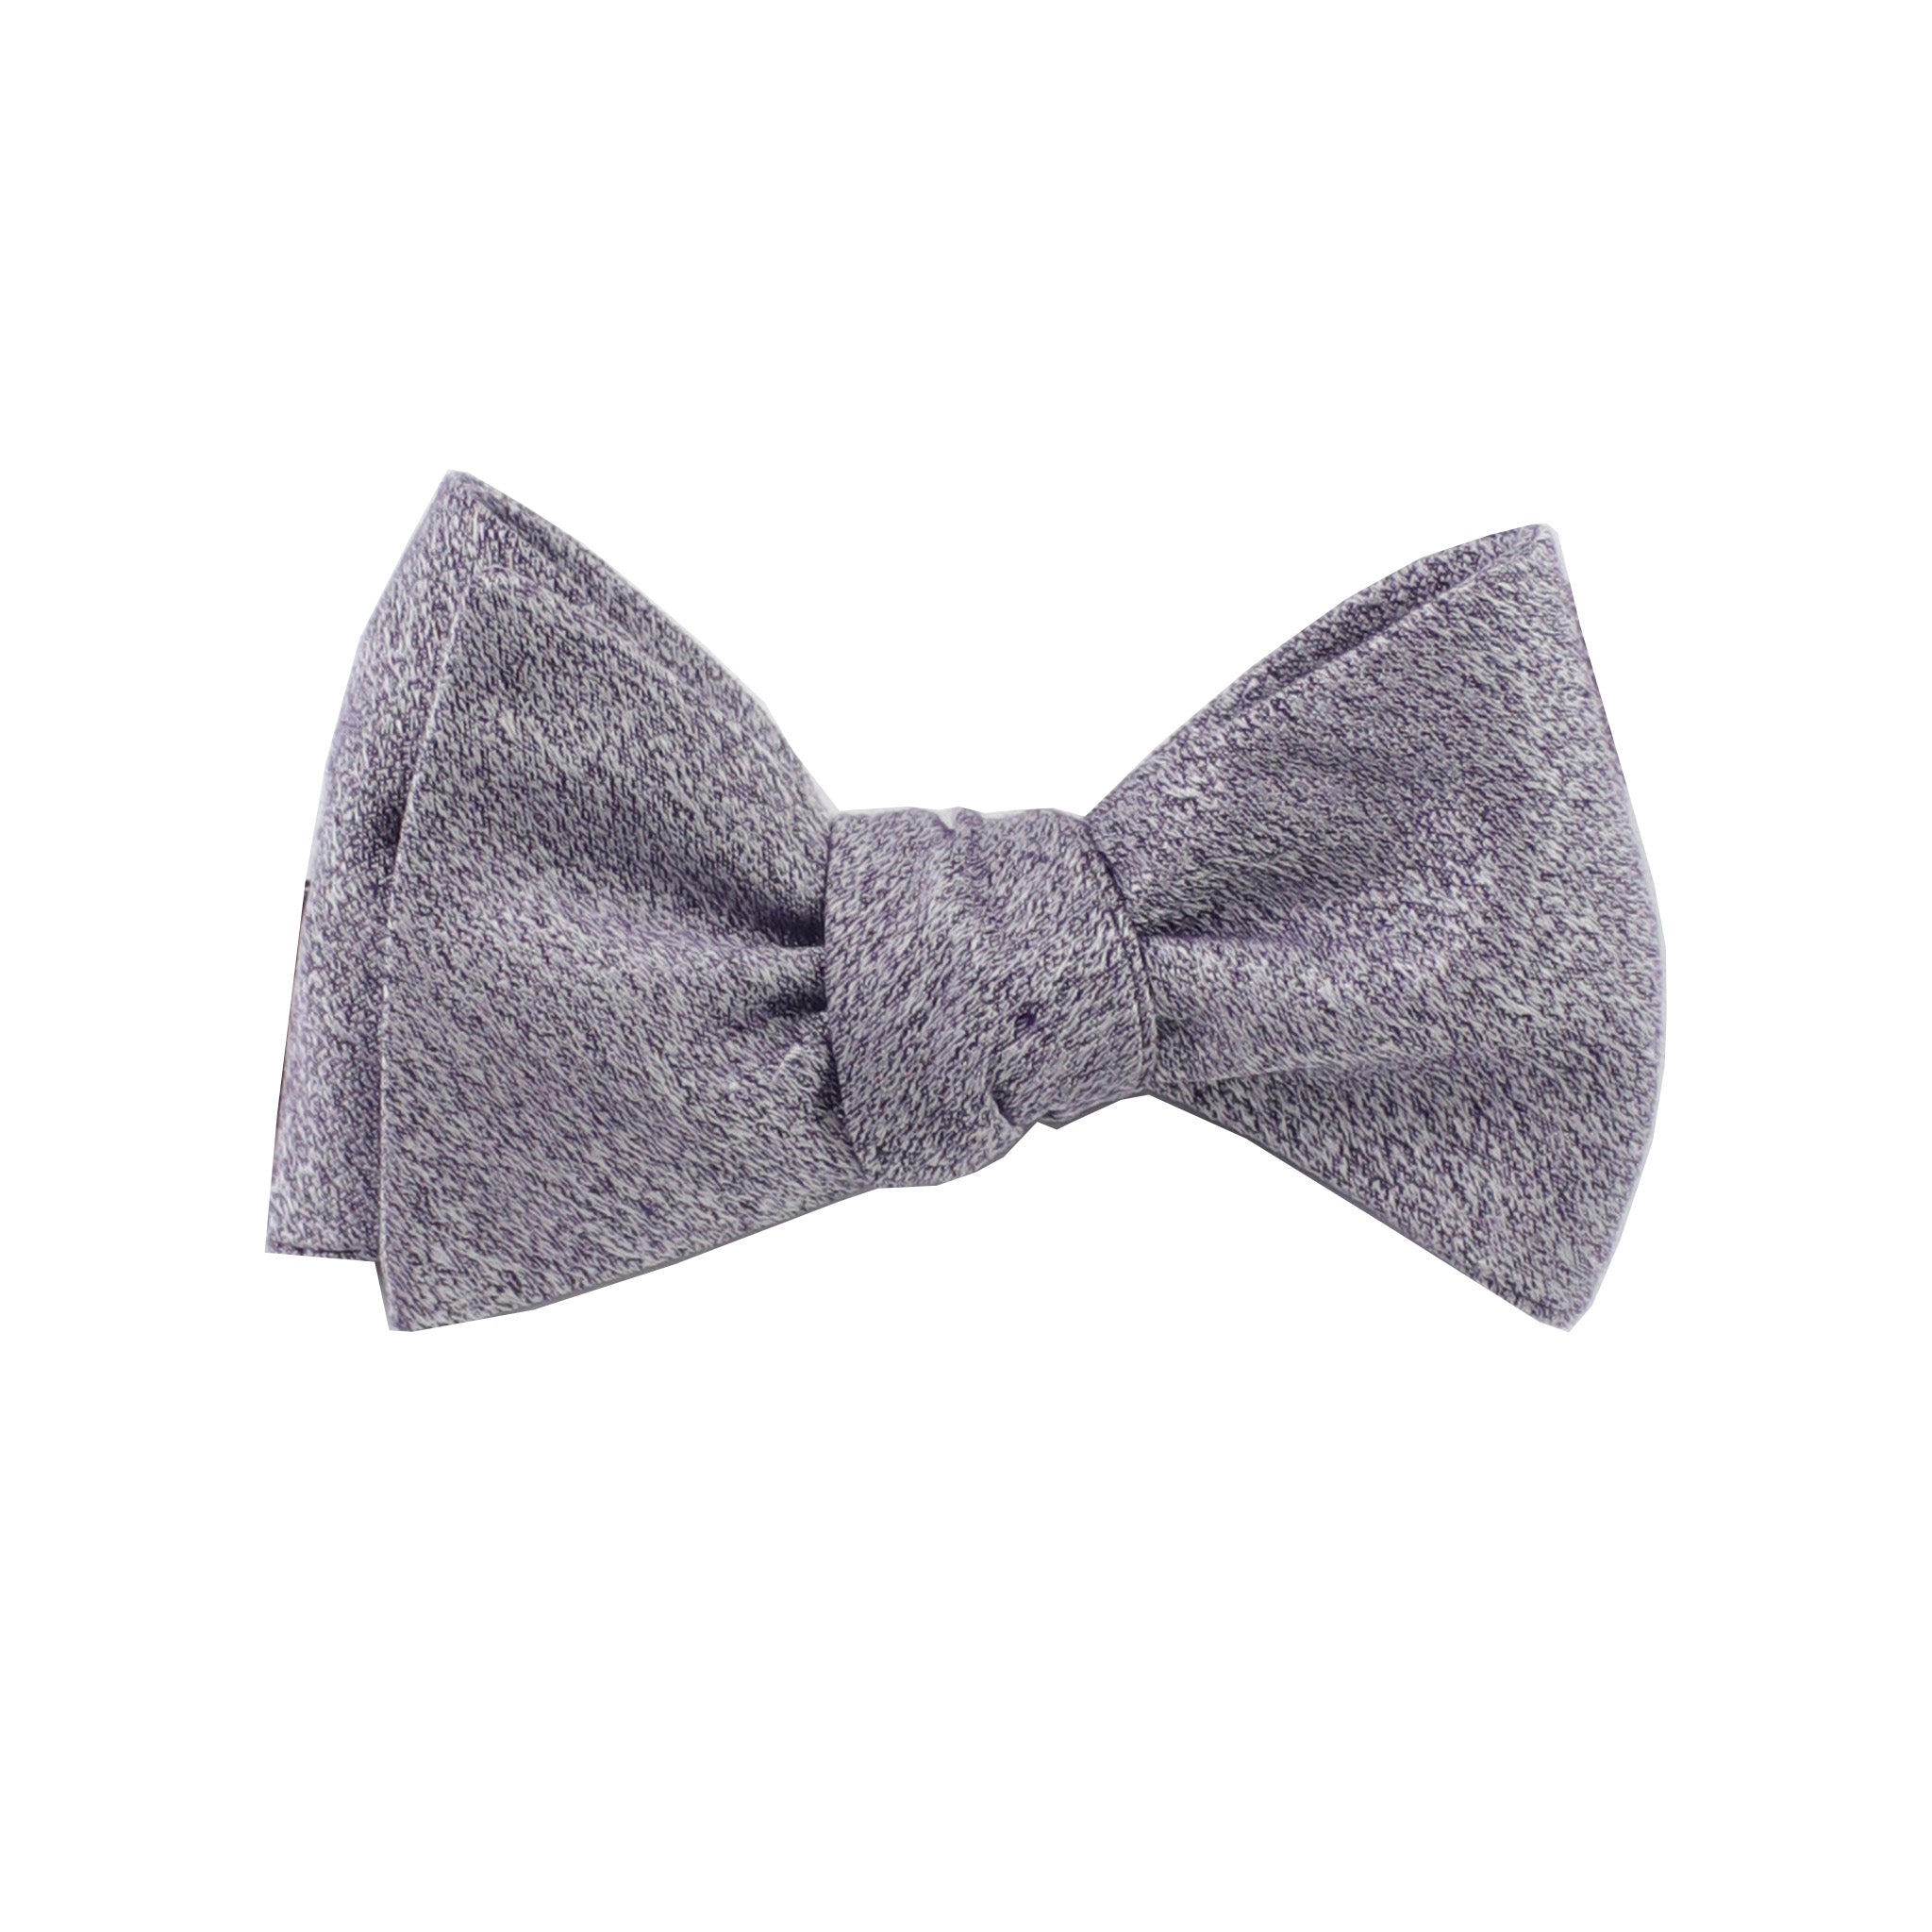 Lilac Textured Self Tie Bow Tie from DIBI